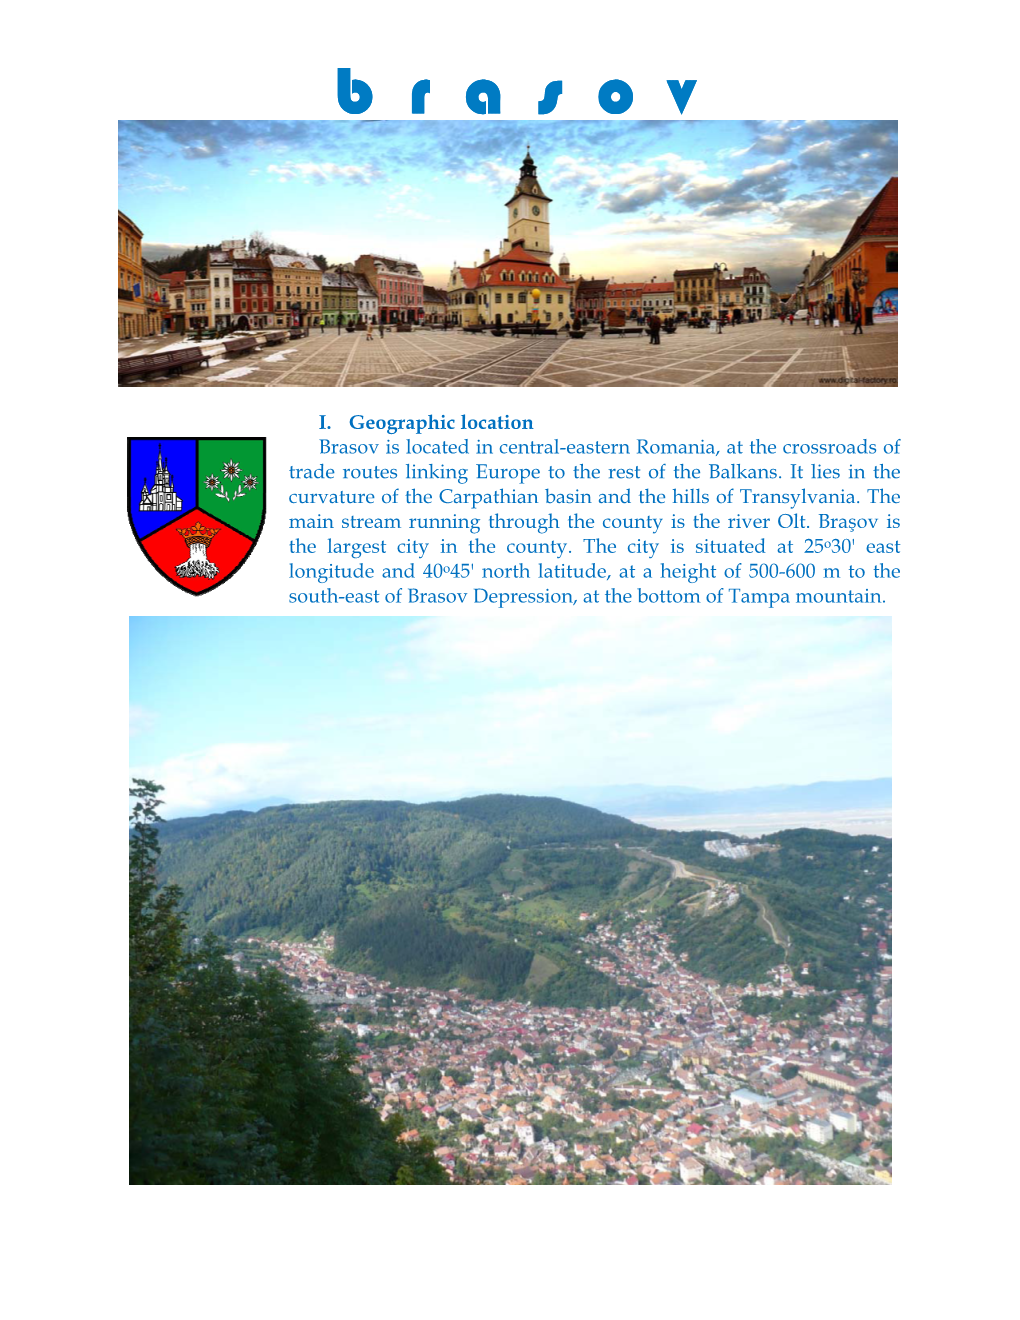 I. Geographic Location Brasov Is Located in Central-Eastern Romania, at the Crossroads of Trade Routes Linking Europe to the Rest of the Balkans